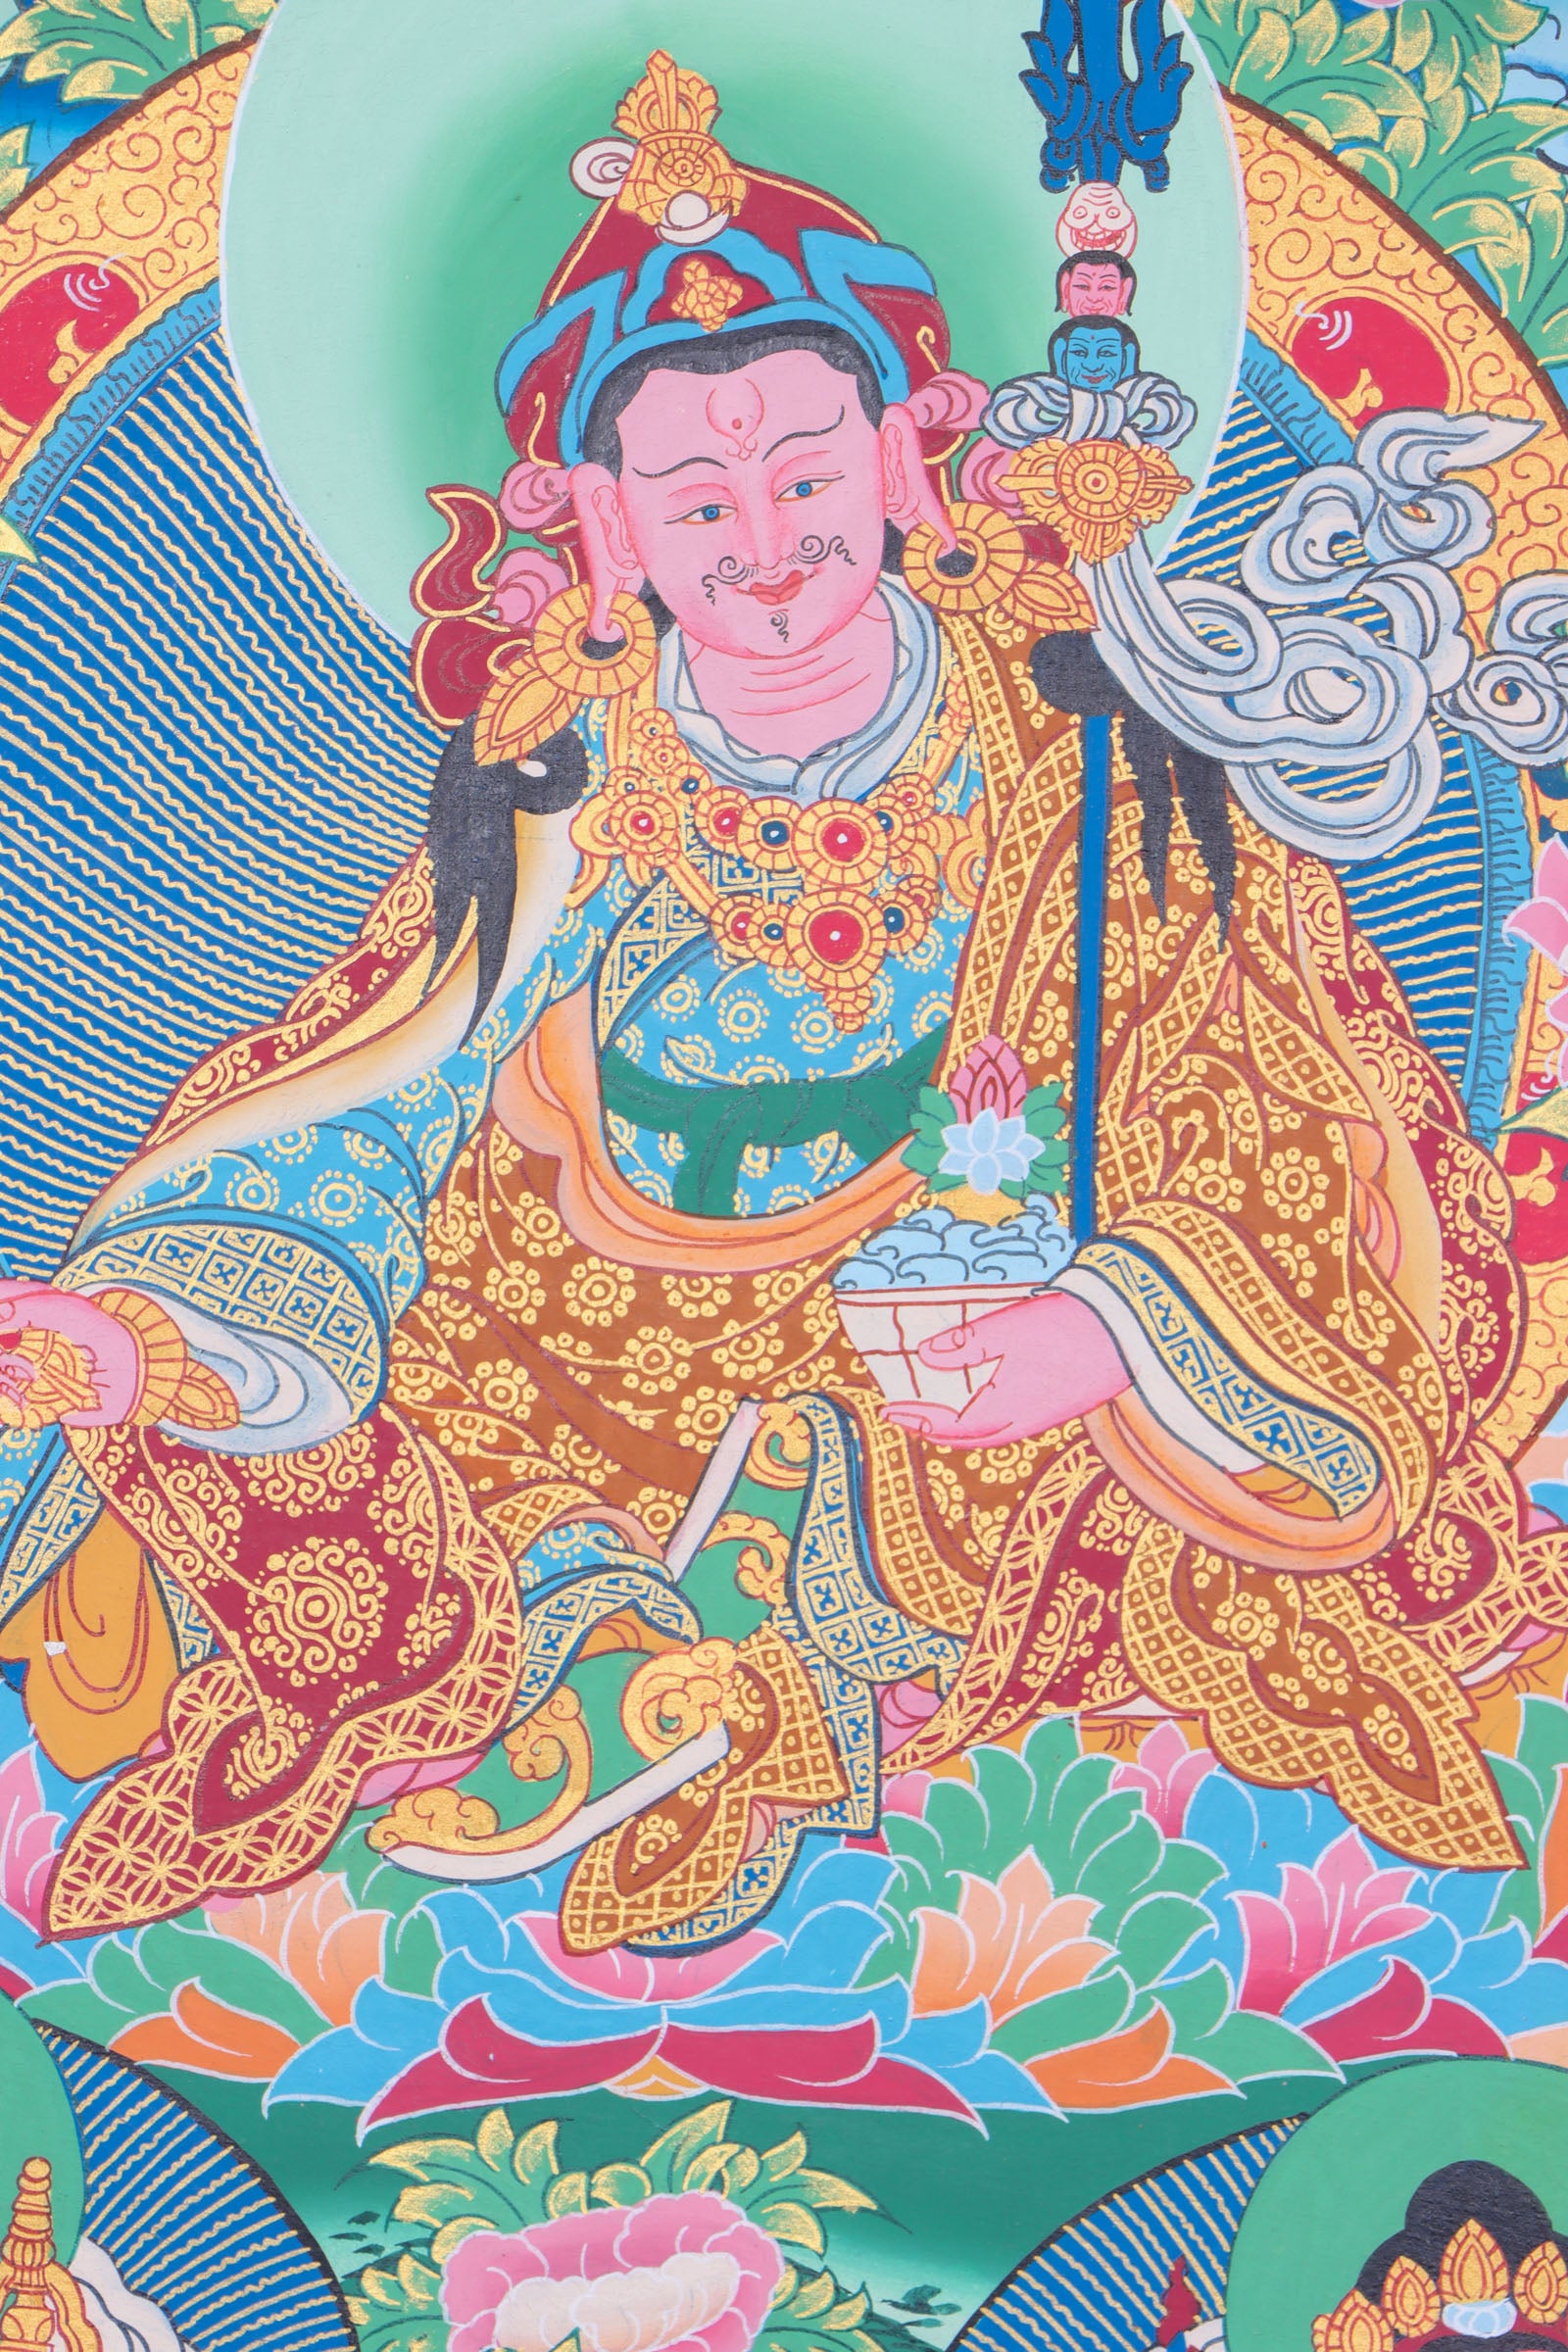 Guru Rinpoche Thangka helps to cultivate devotion, faith, and a connection to Guru Rinpoche's wisdom and compassion.